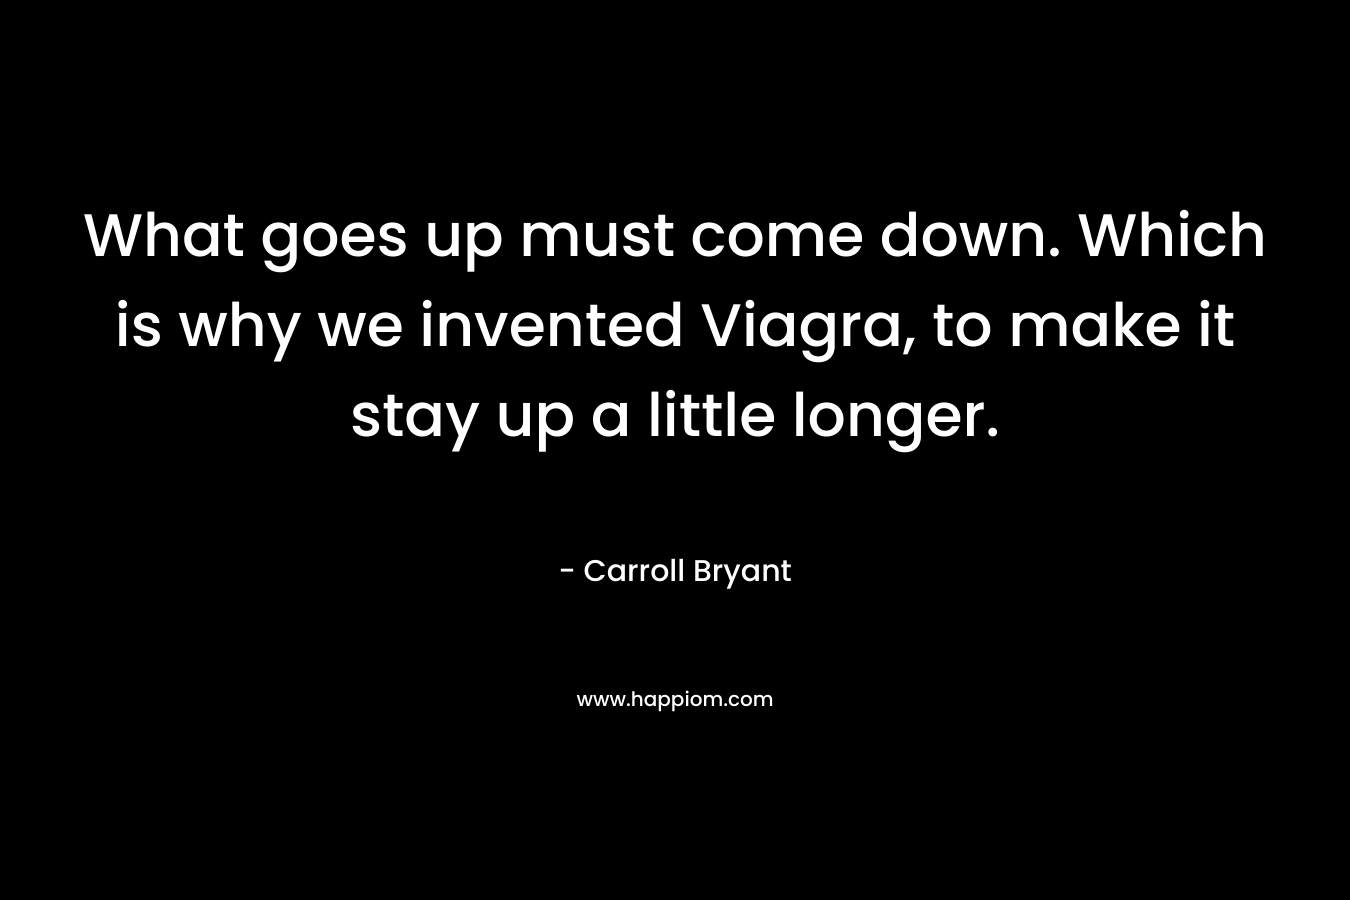 What goes up must come down. Which is why we invented Viagra, to make it stay up a little longer.